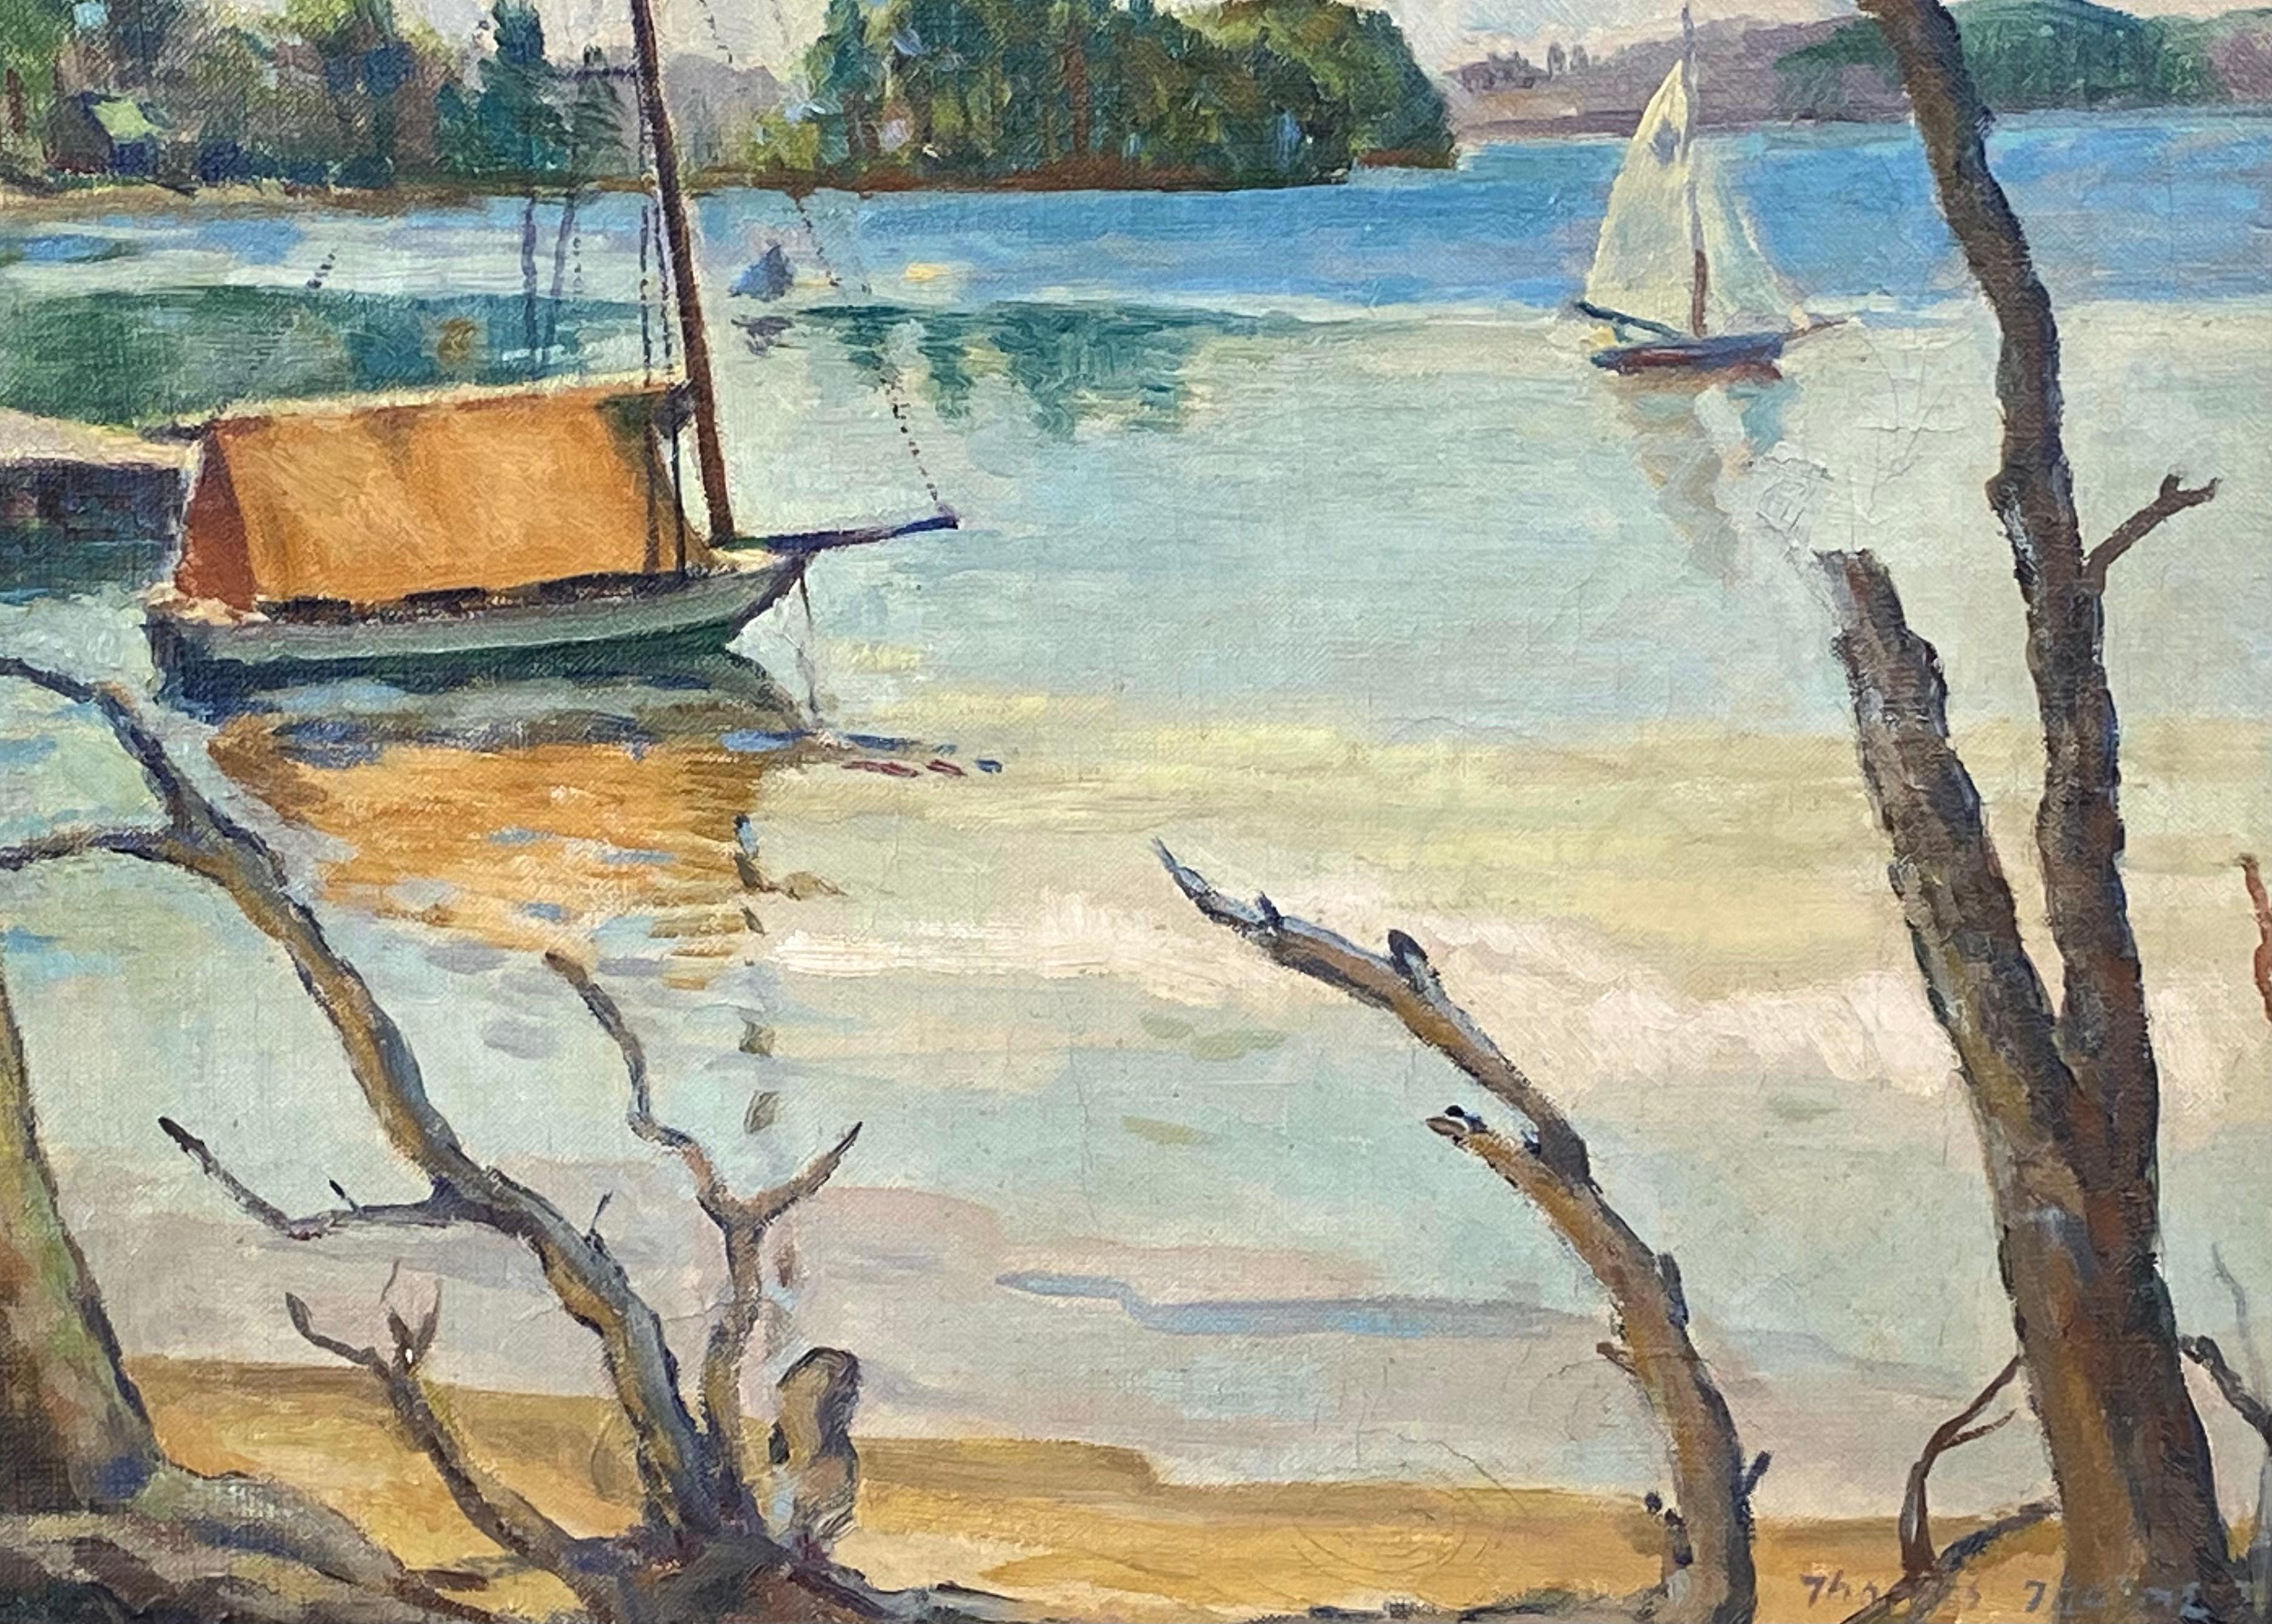 Here for your consideration is an early original oil on canvas painting of boats on Sebago Lake in Maine by the American artist, Thomas Elston Thorne. Signed lower right and dated 1932. Titled and dated verso. Condition is very good. The artwork is